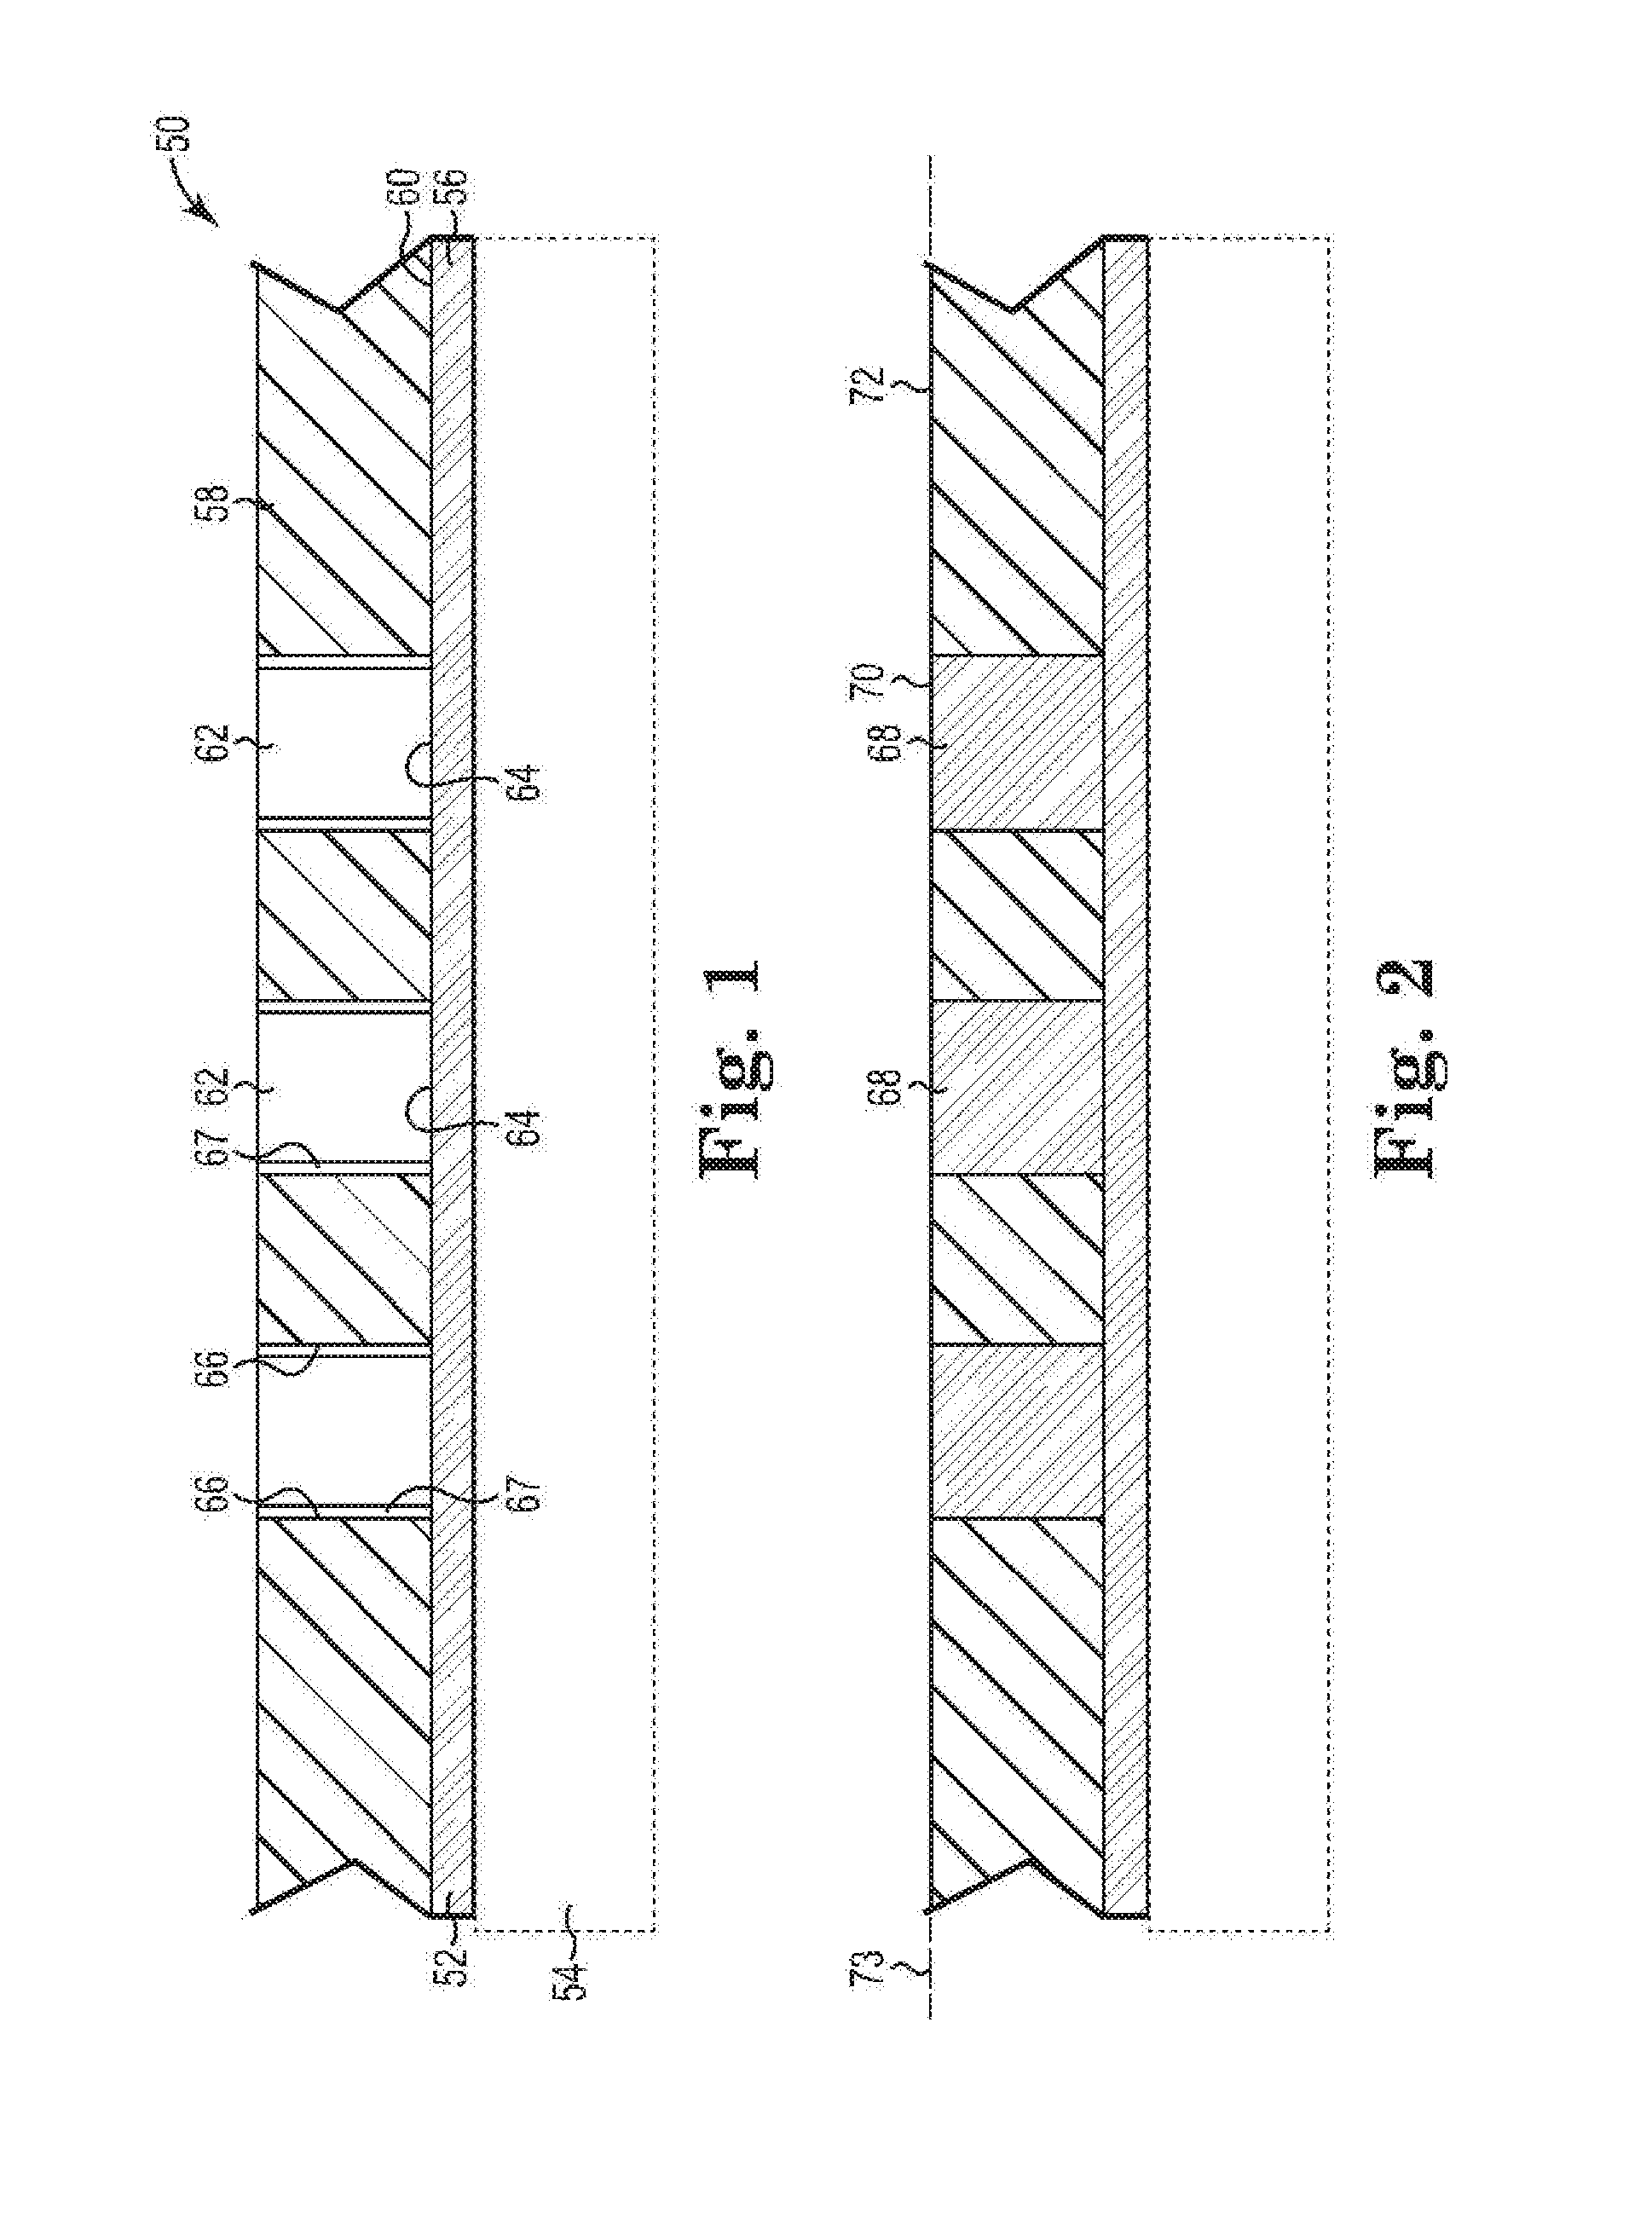 Fusion bonded liquid crystal polymer electrical circuit structure